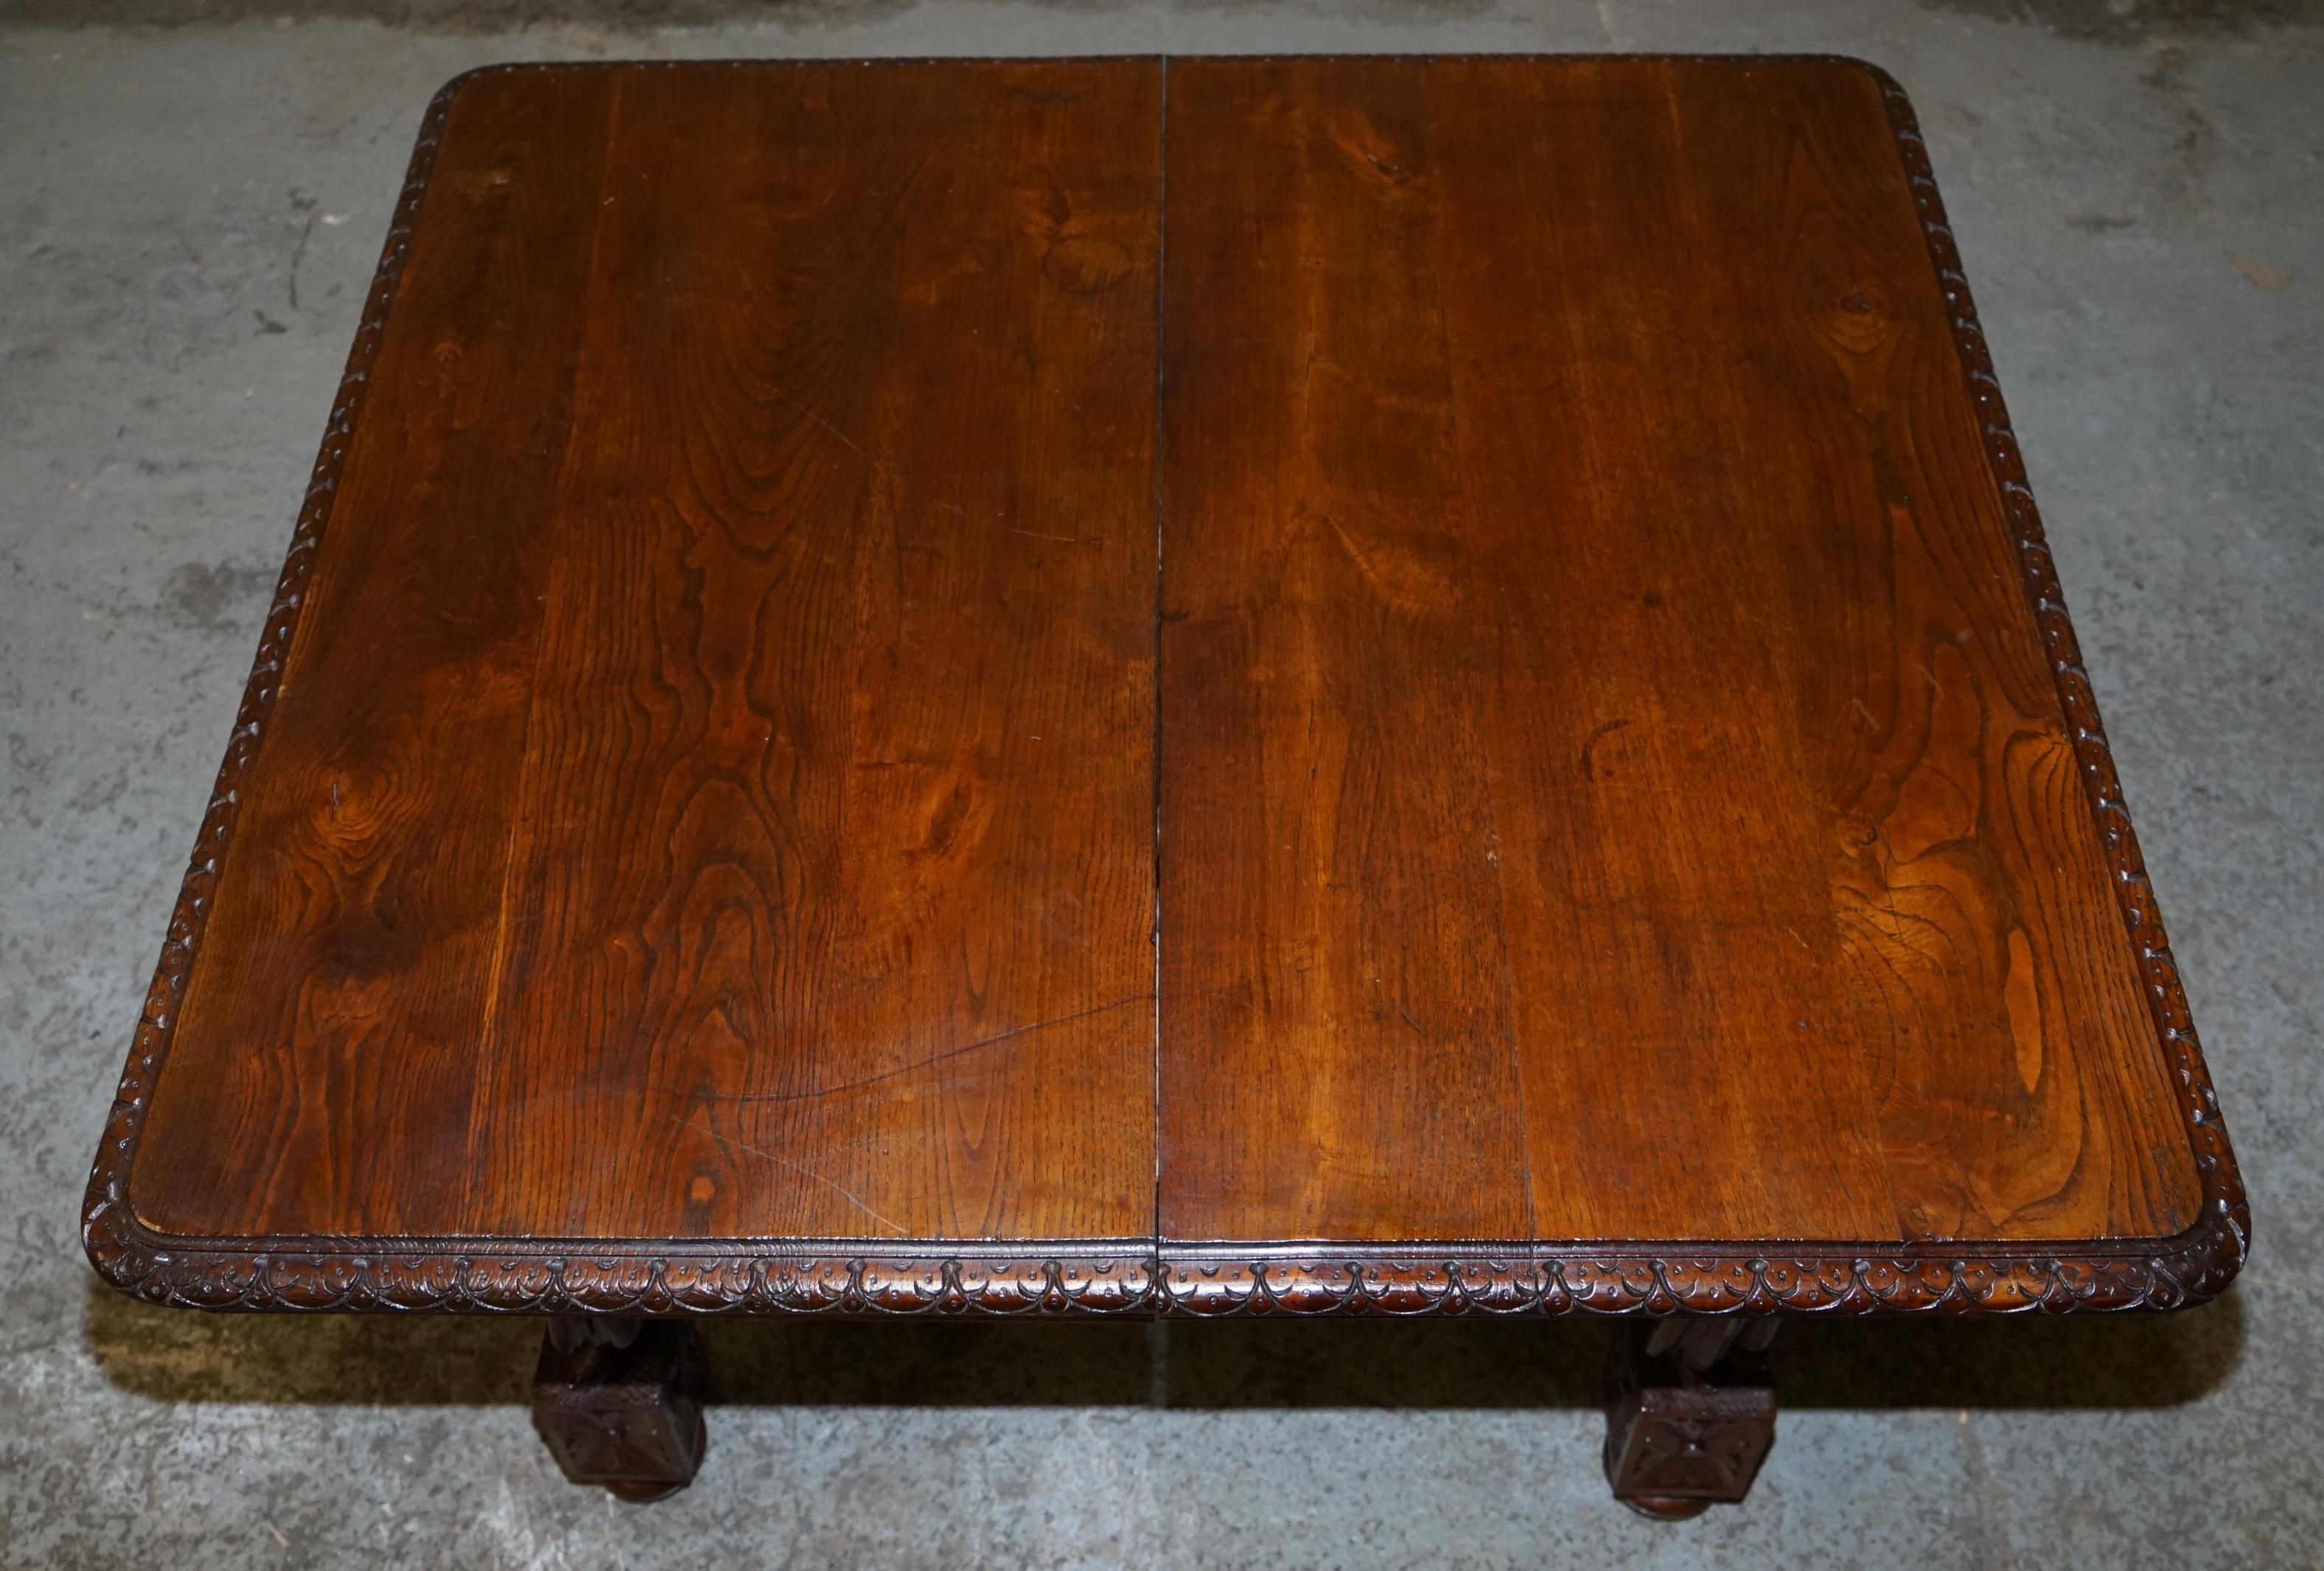 Rare circa 1880 French Brittany Hand Carved Chestnut Wood Extending Dining Table 5